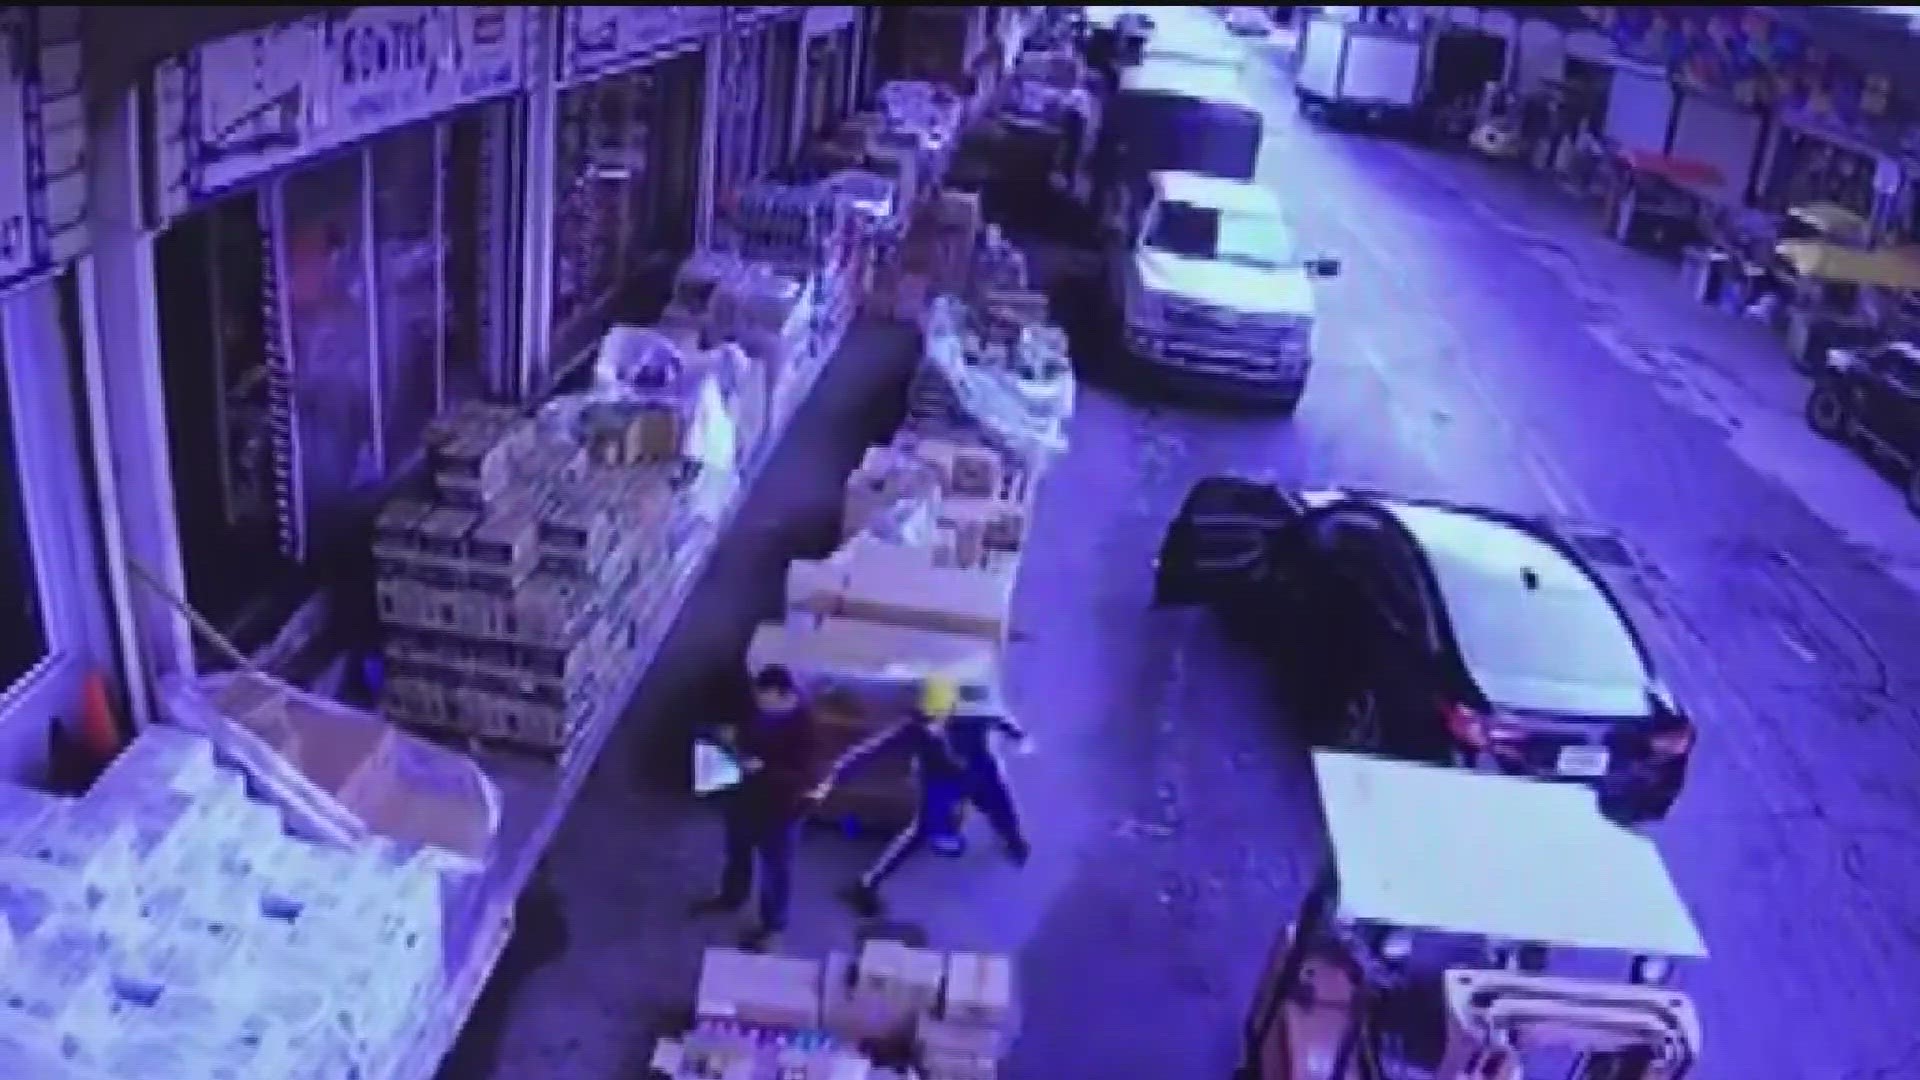 Surveillance video shows a man getting his wallet stolen, then being dragged by the thief's vehicle down an alley. Vendors say robberies happen about 4 times a week.